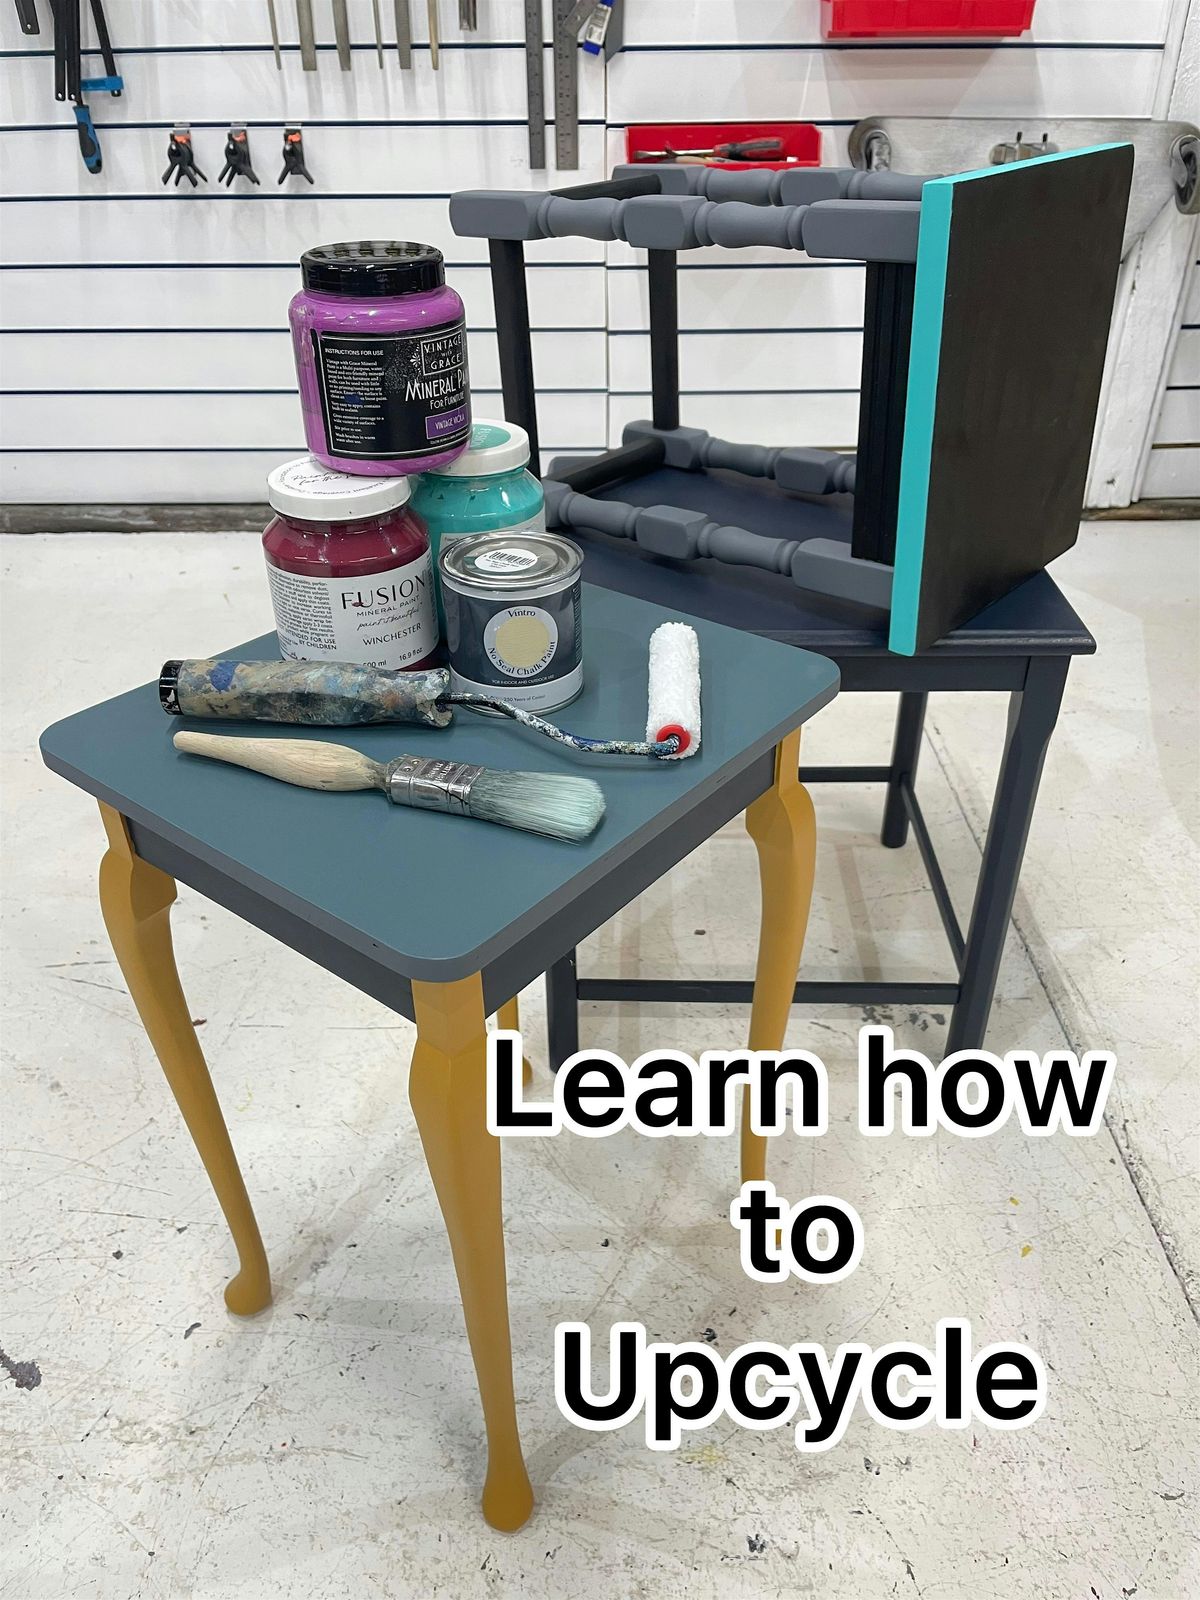 Learn how to Upcycle